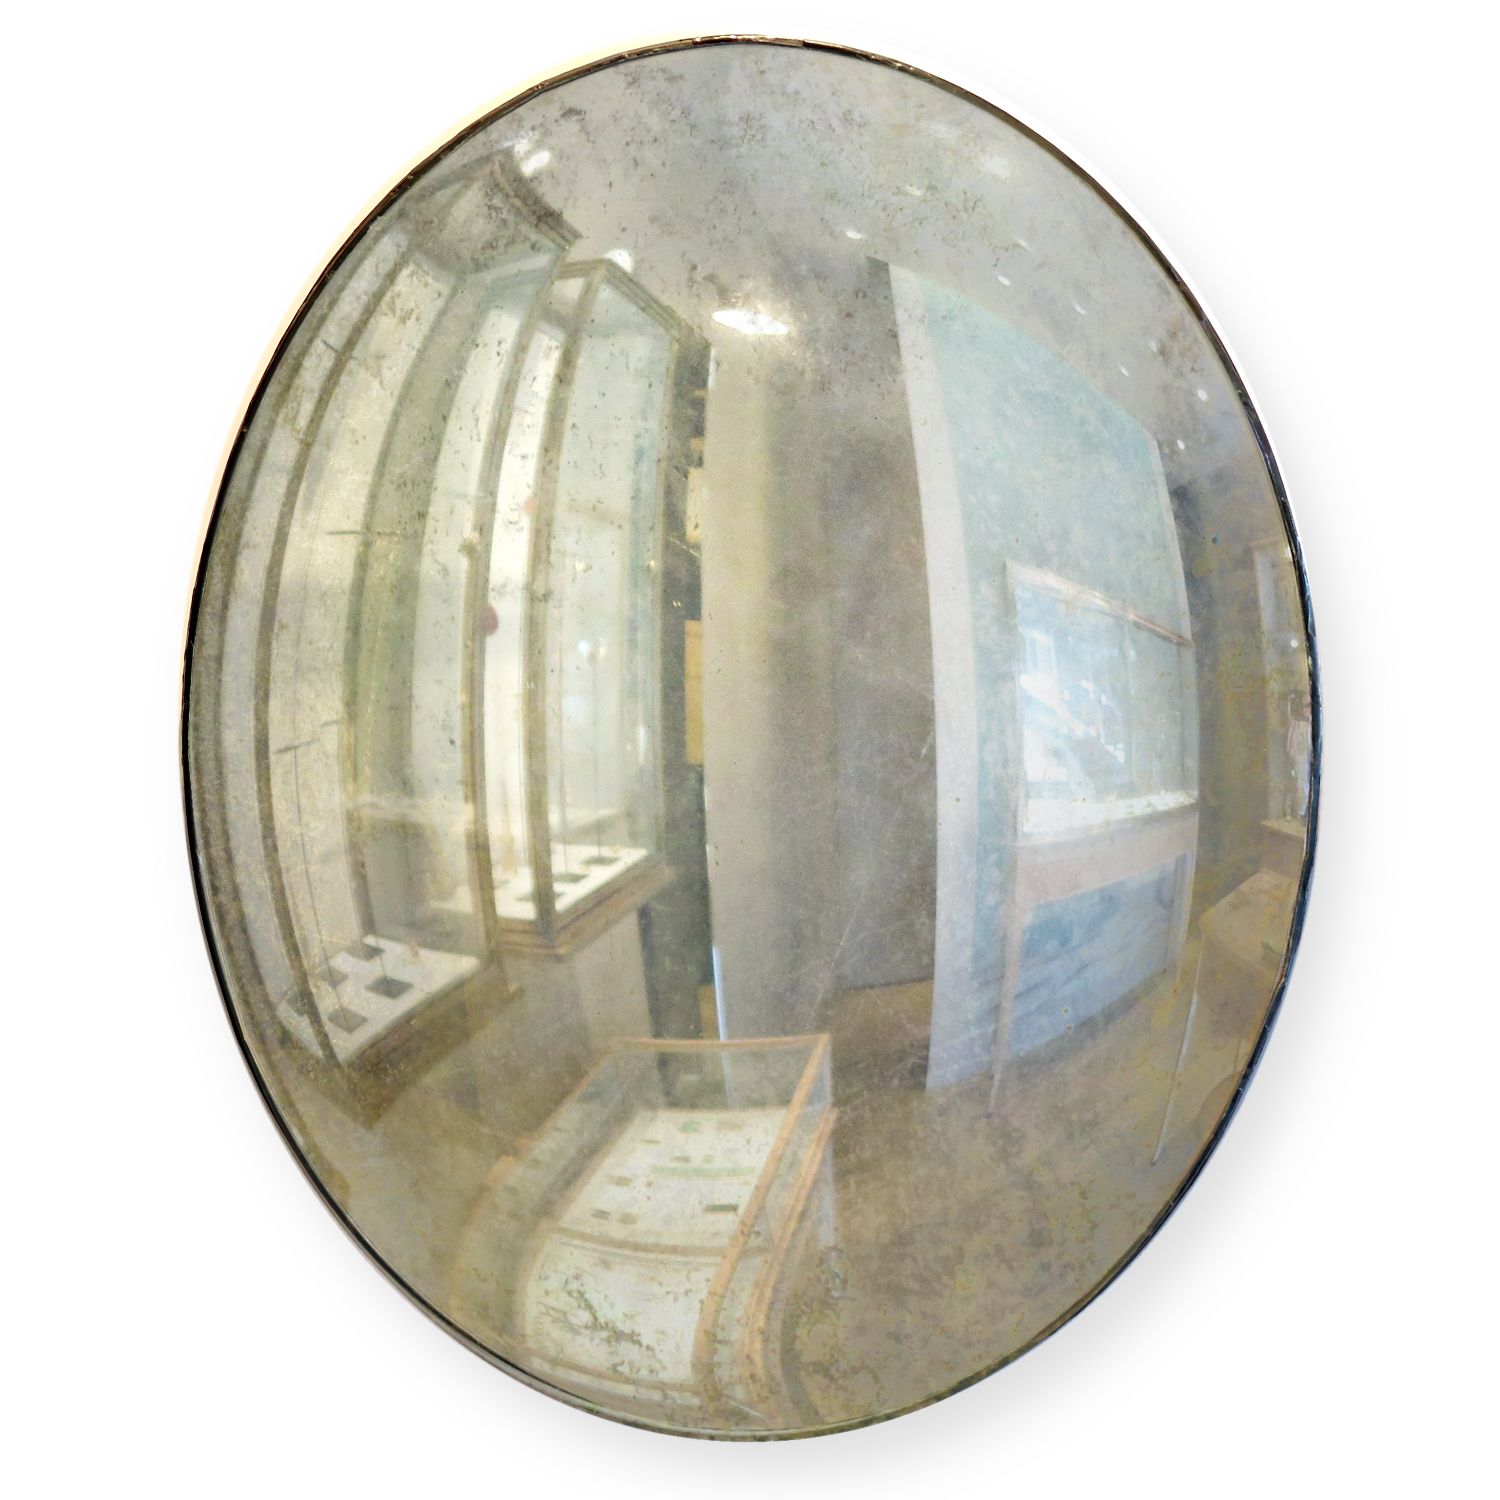 Maureen Fullam 16 X 20 Inches Large Convex Oval Silver Leafed Regarding Large Convex Mirror (View 5 of 15)